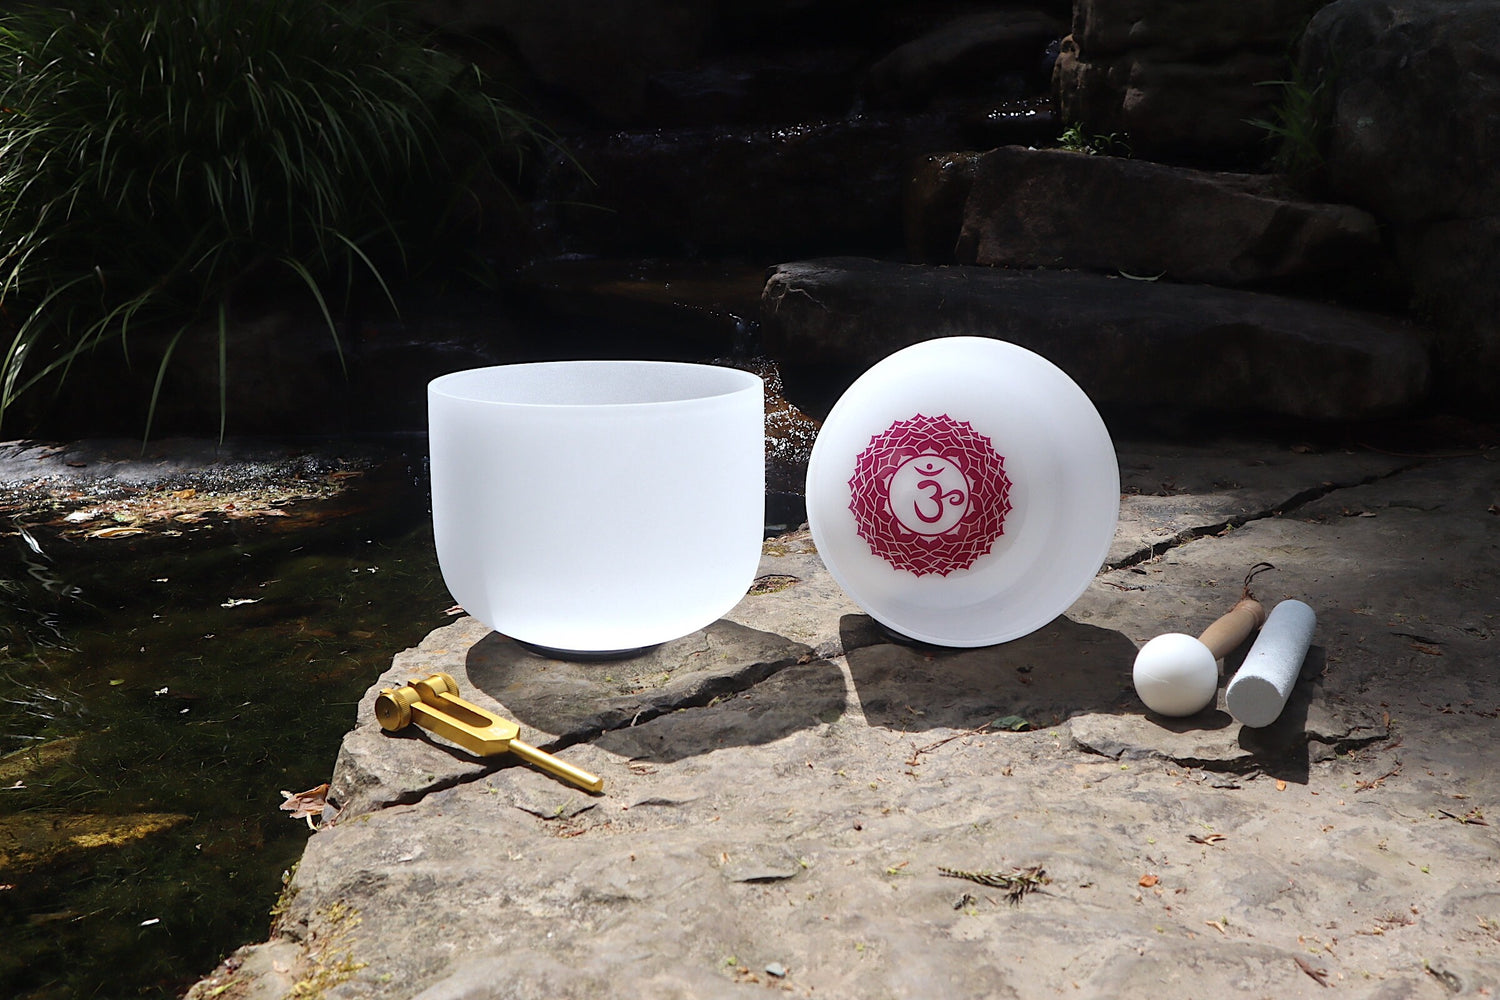 528 Hz Singing Bowl and 432 Hz Chakra Printed Bowl Bundle with Tuning Fork - 8” Bowl, 7” Bowl, Padded Carry Case, Suede Striker, and O-ring